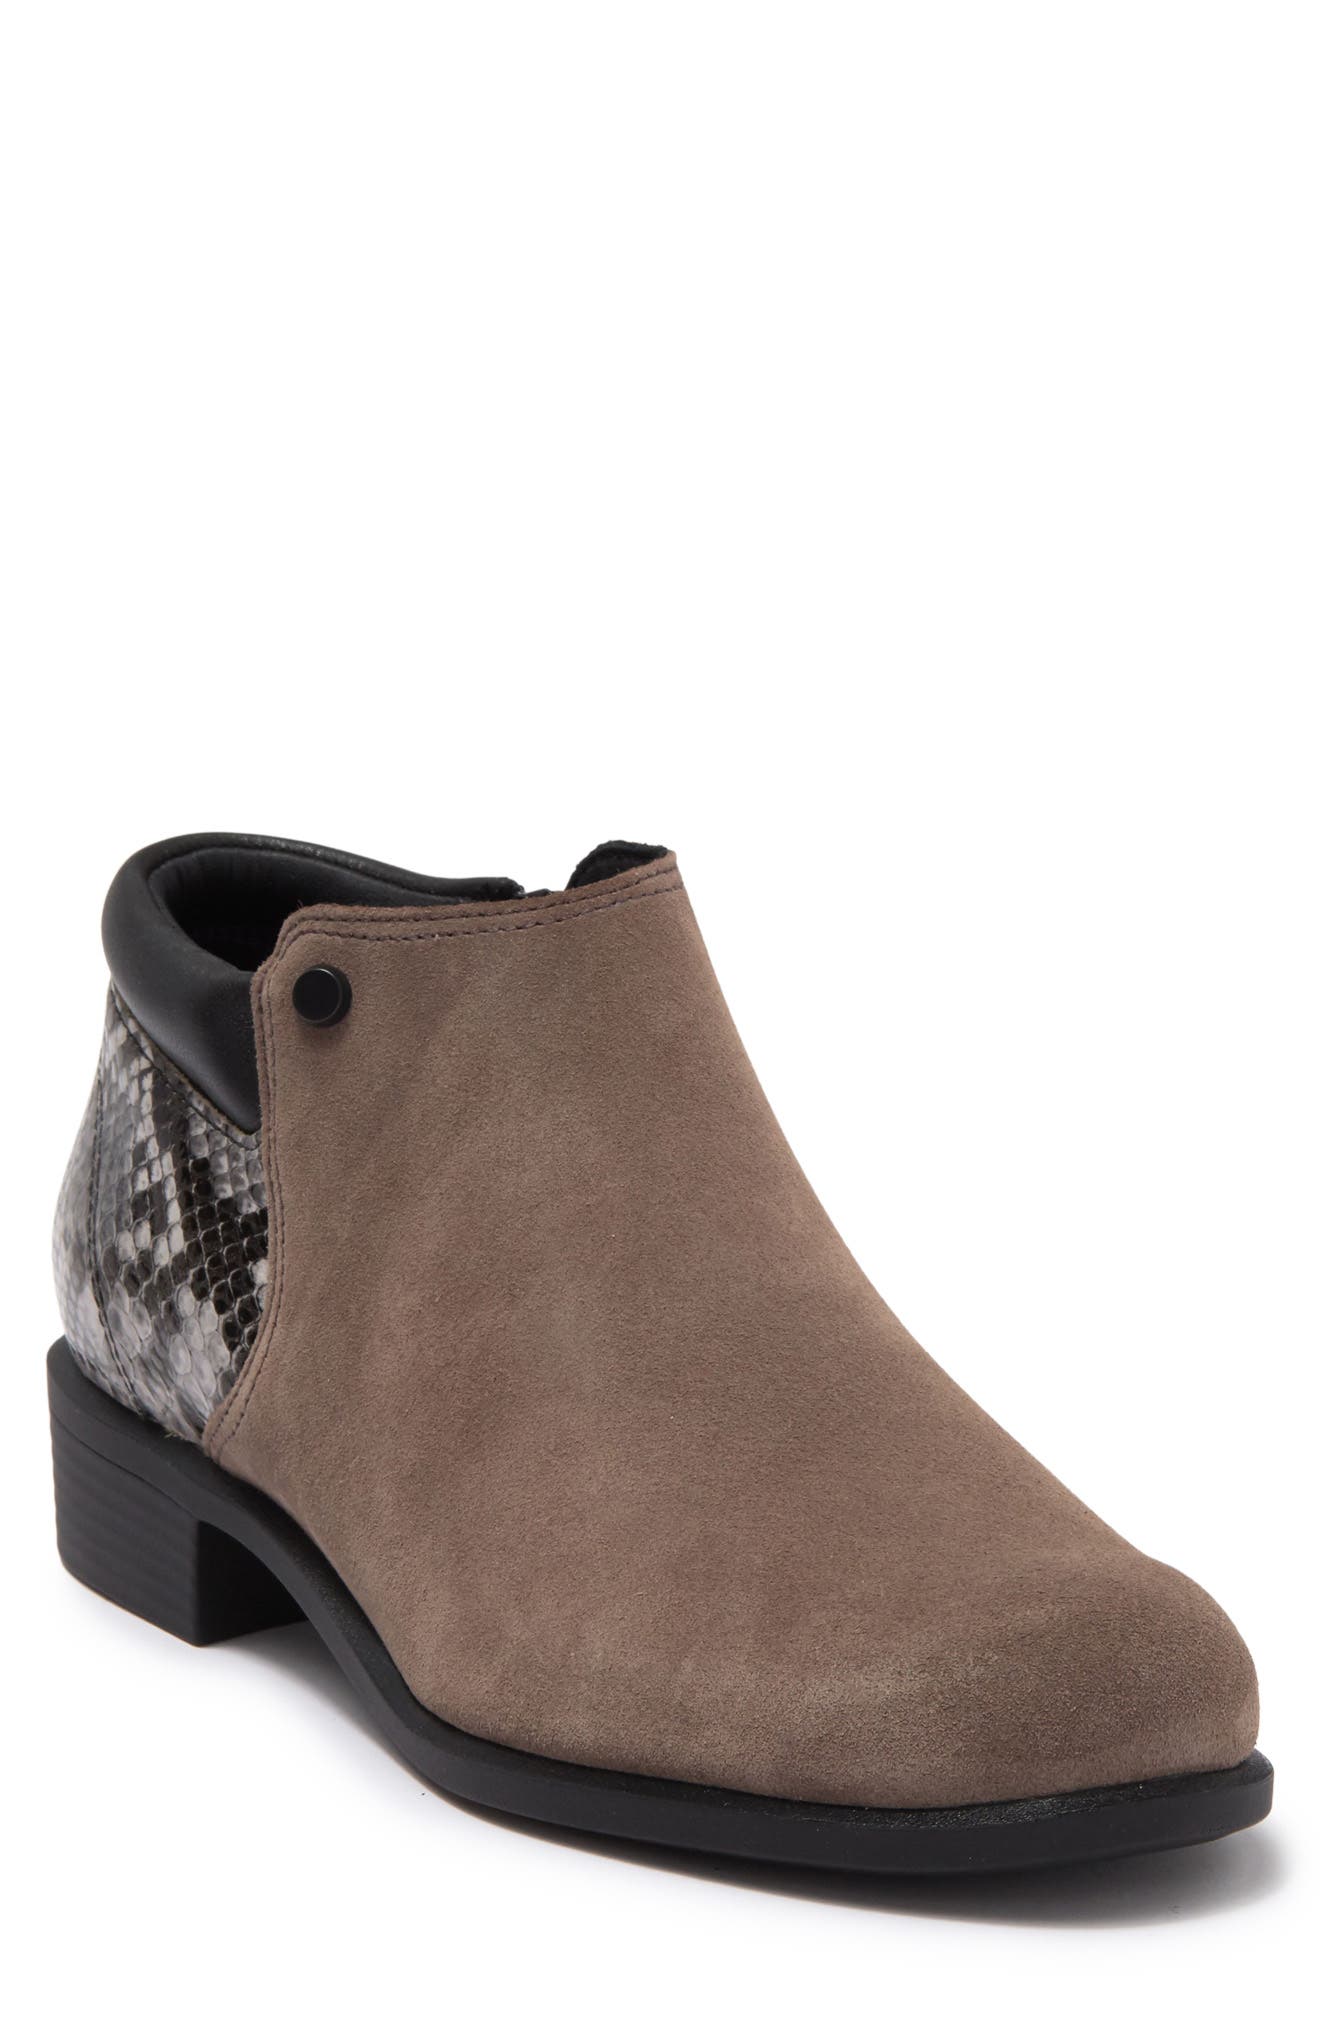 Sas Bethany Ankle Boot In Tumbleweed